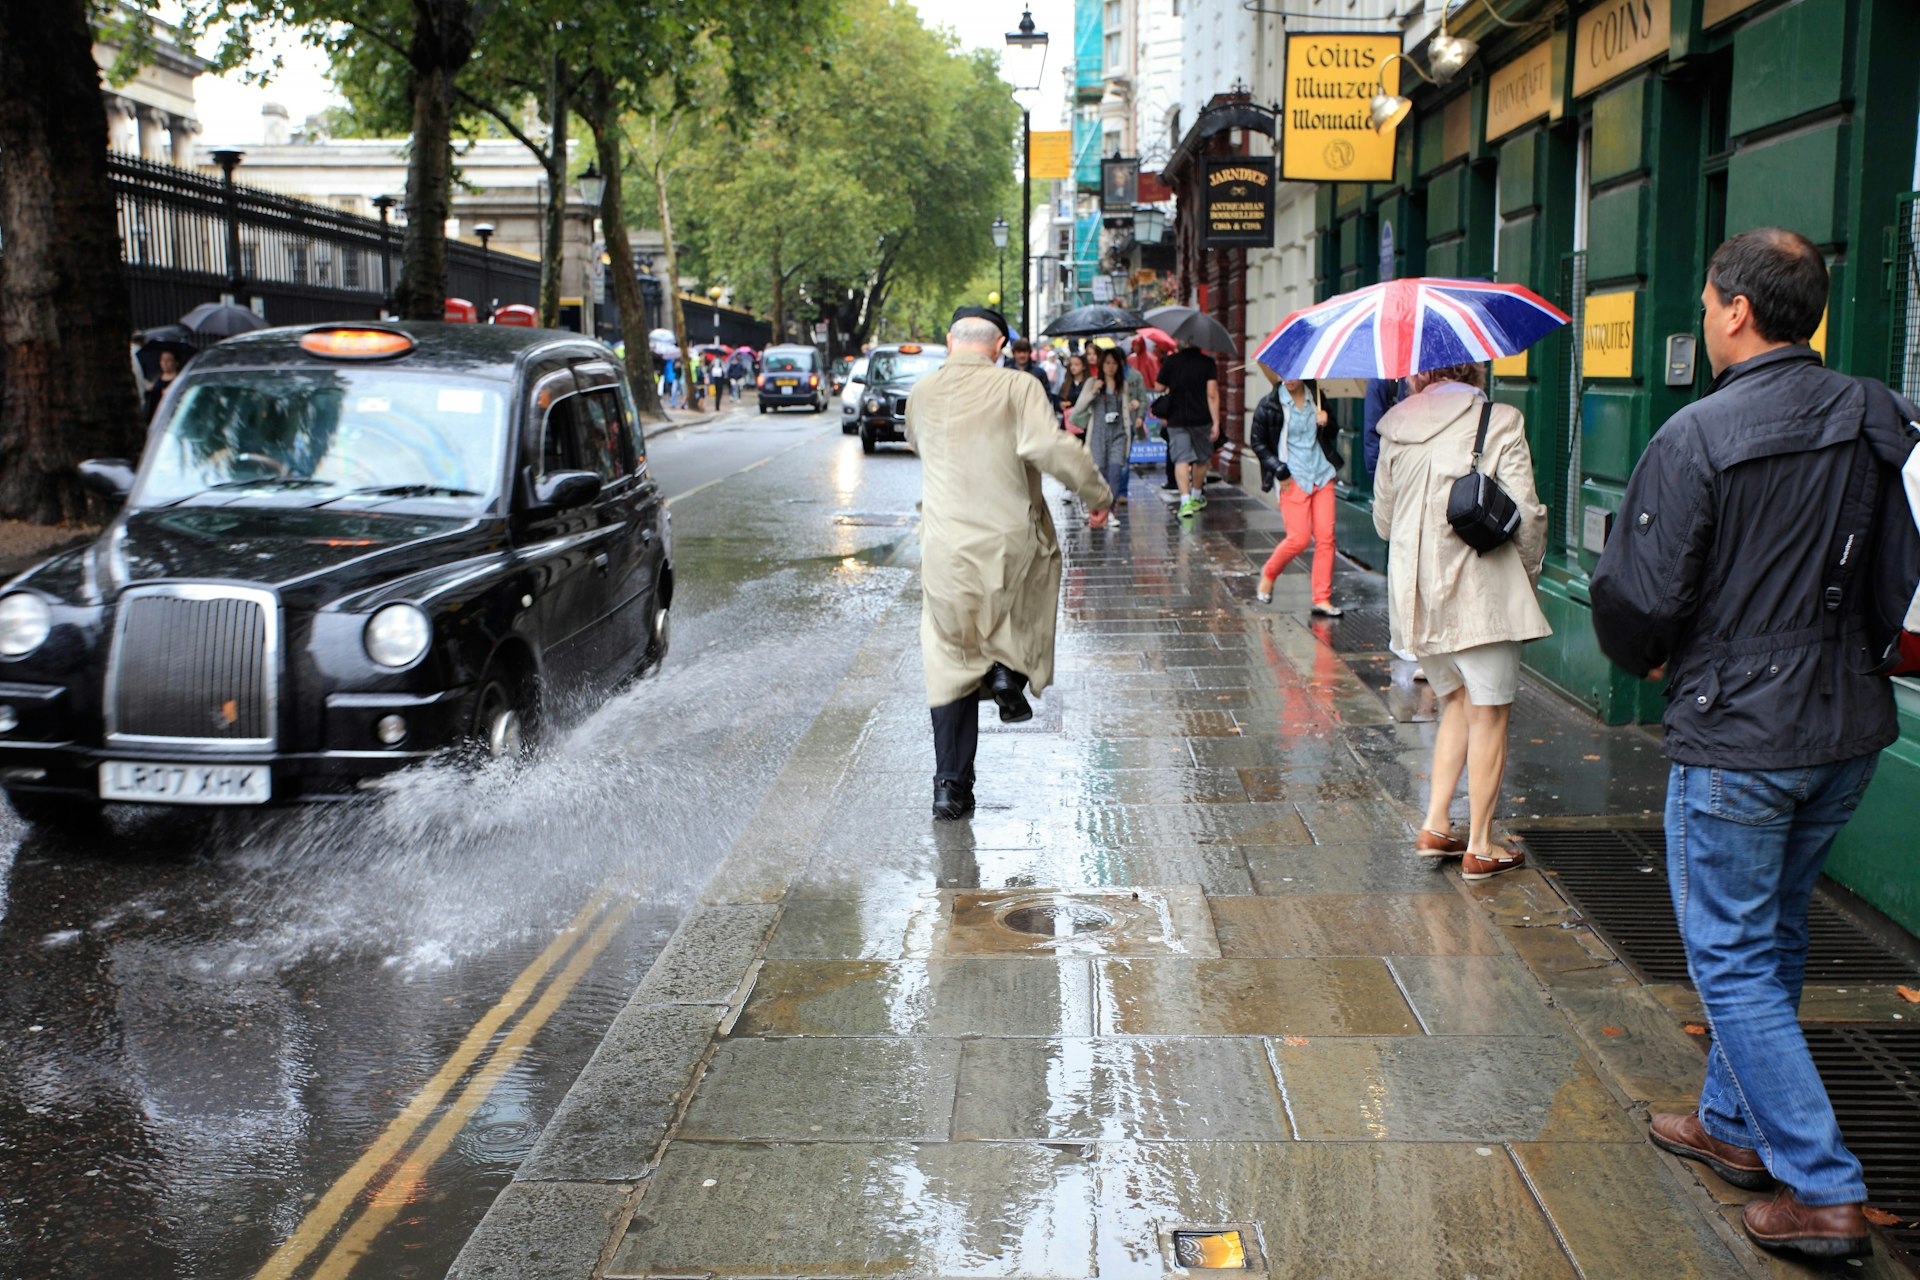 It doesn't rain as much as people think, but it's wise to be prepared for when it does © PICS4U / Getty Images